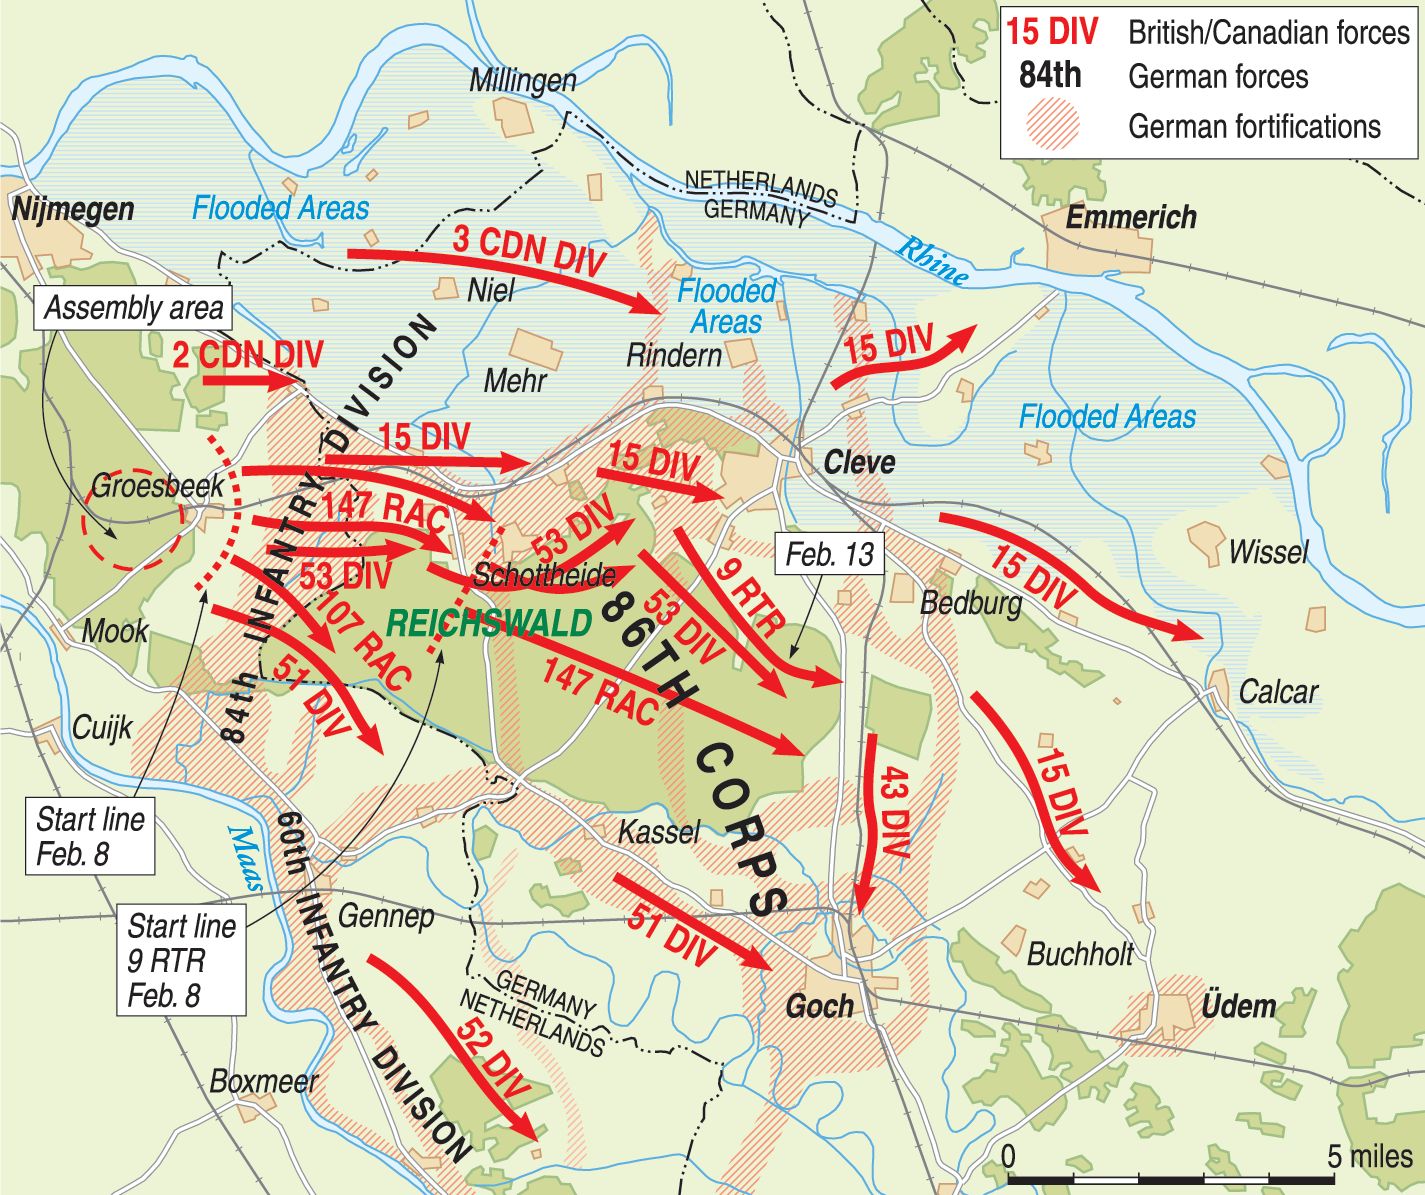 The divisions of XXX Corps met stiff resistance from German defenders in the Reichwald, despite heavy Allied bombardment before the assault. Other Allied units were delayed by the German sabotage of dams, flooding low-lying areas in the Rhineland, allowing more troops to oppose XXX Corps.